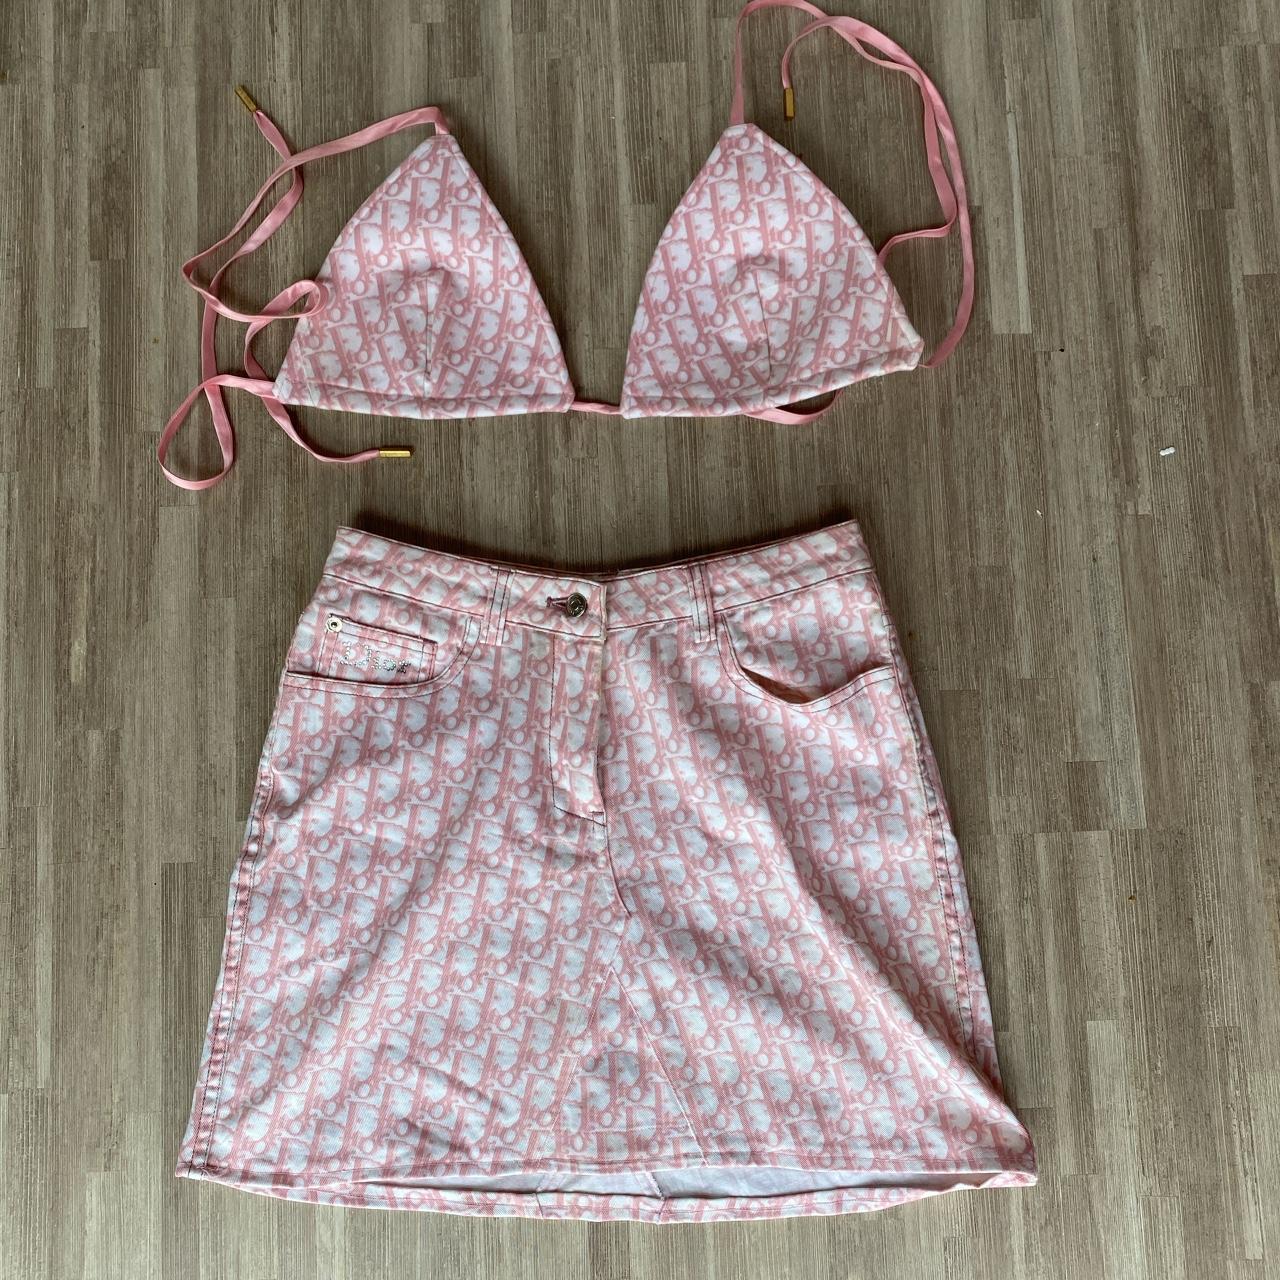 𓃭 on Twitter Dior top and skirt monogram set httpstcooaa0MFvZMY  X